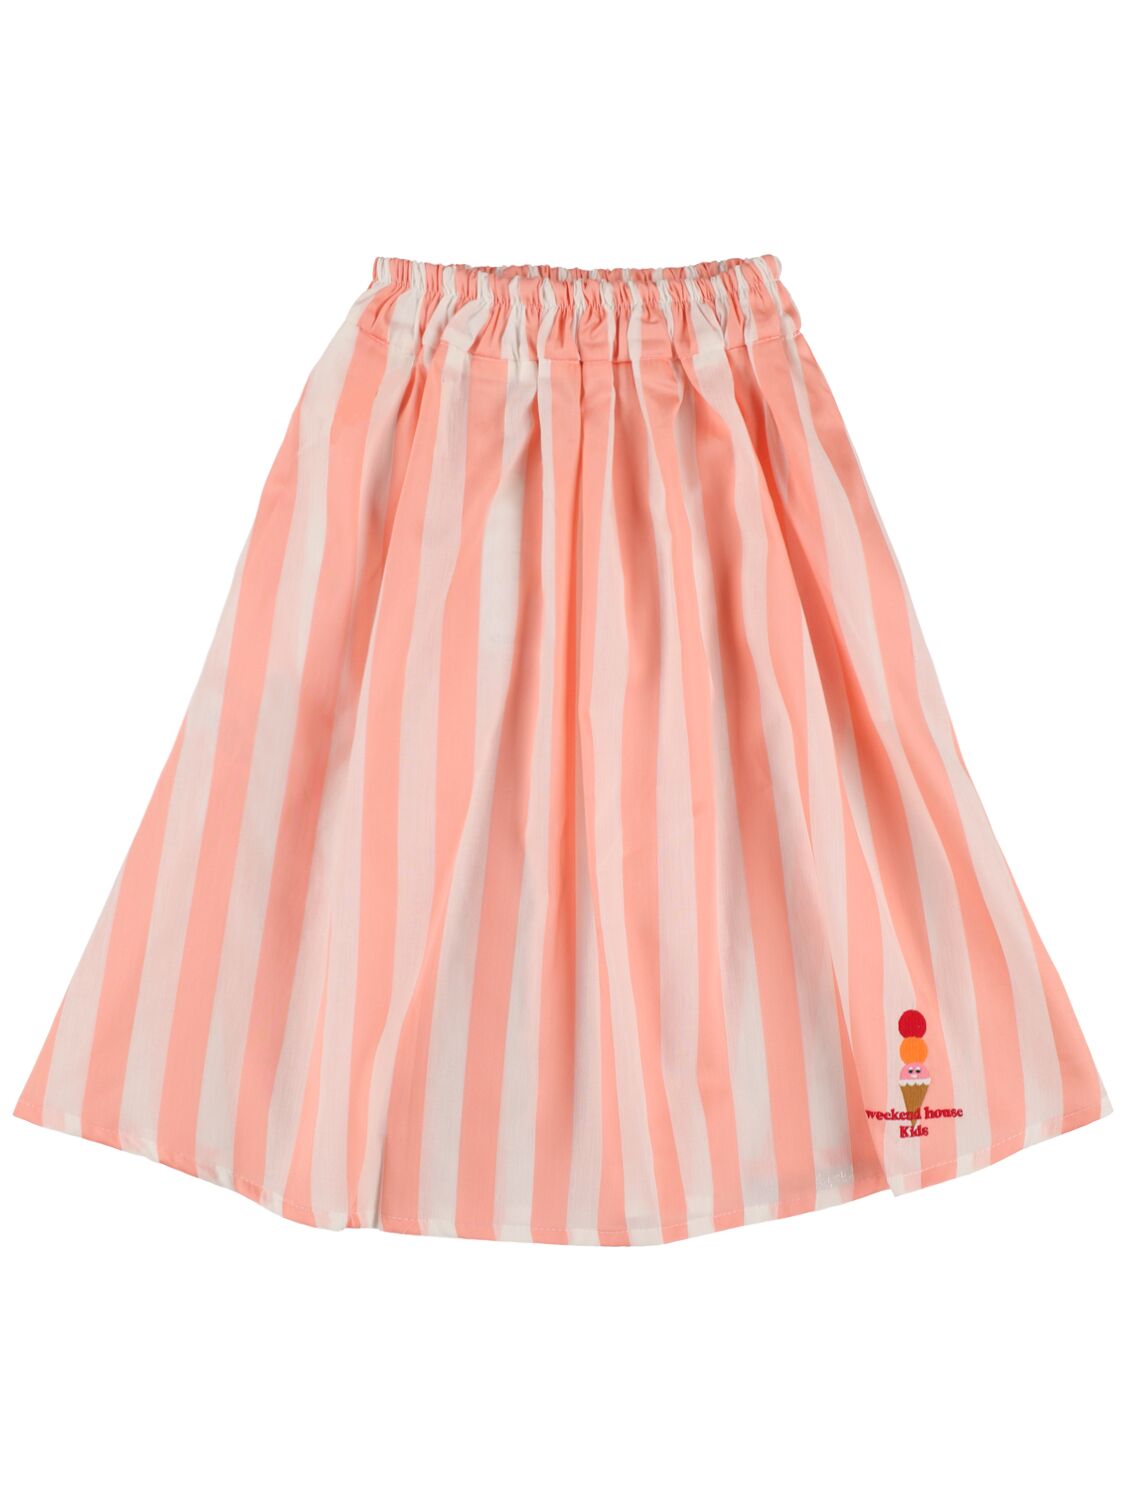 Image of Striped Cotton Skirt